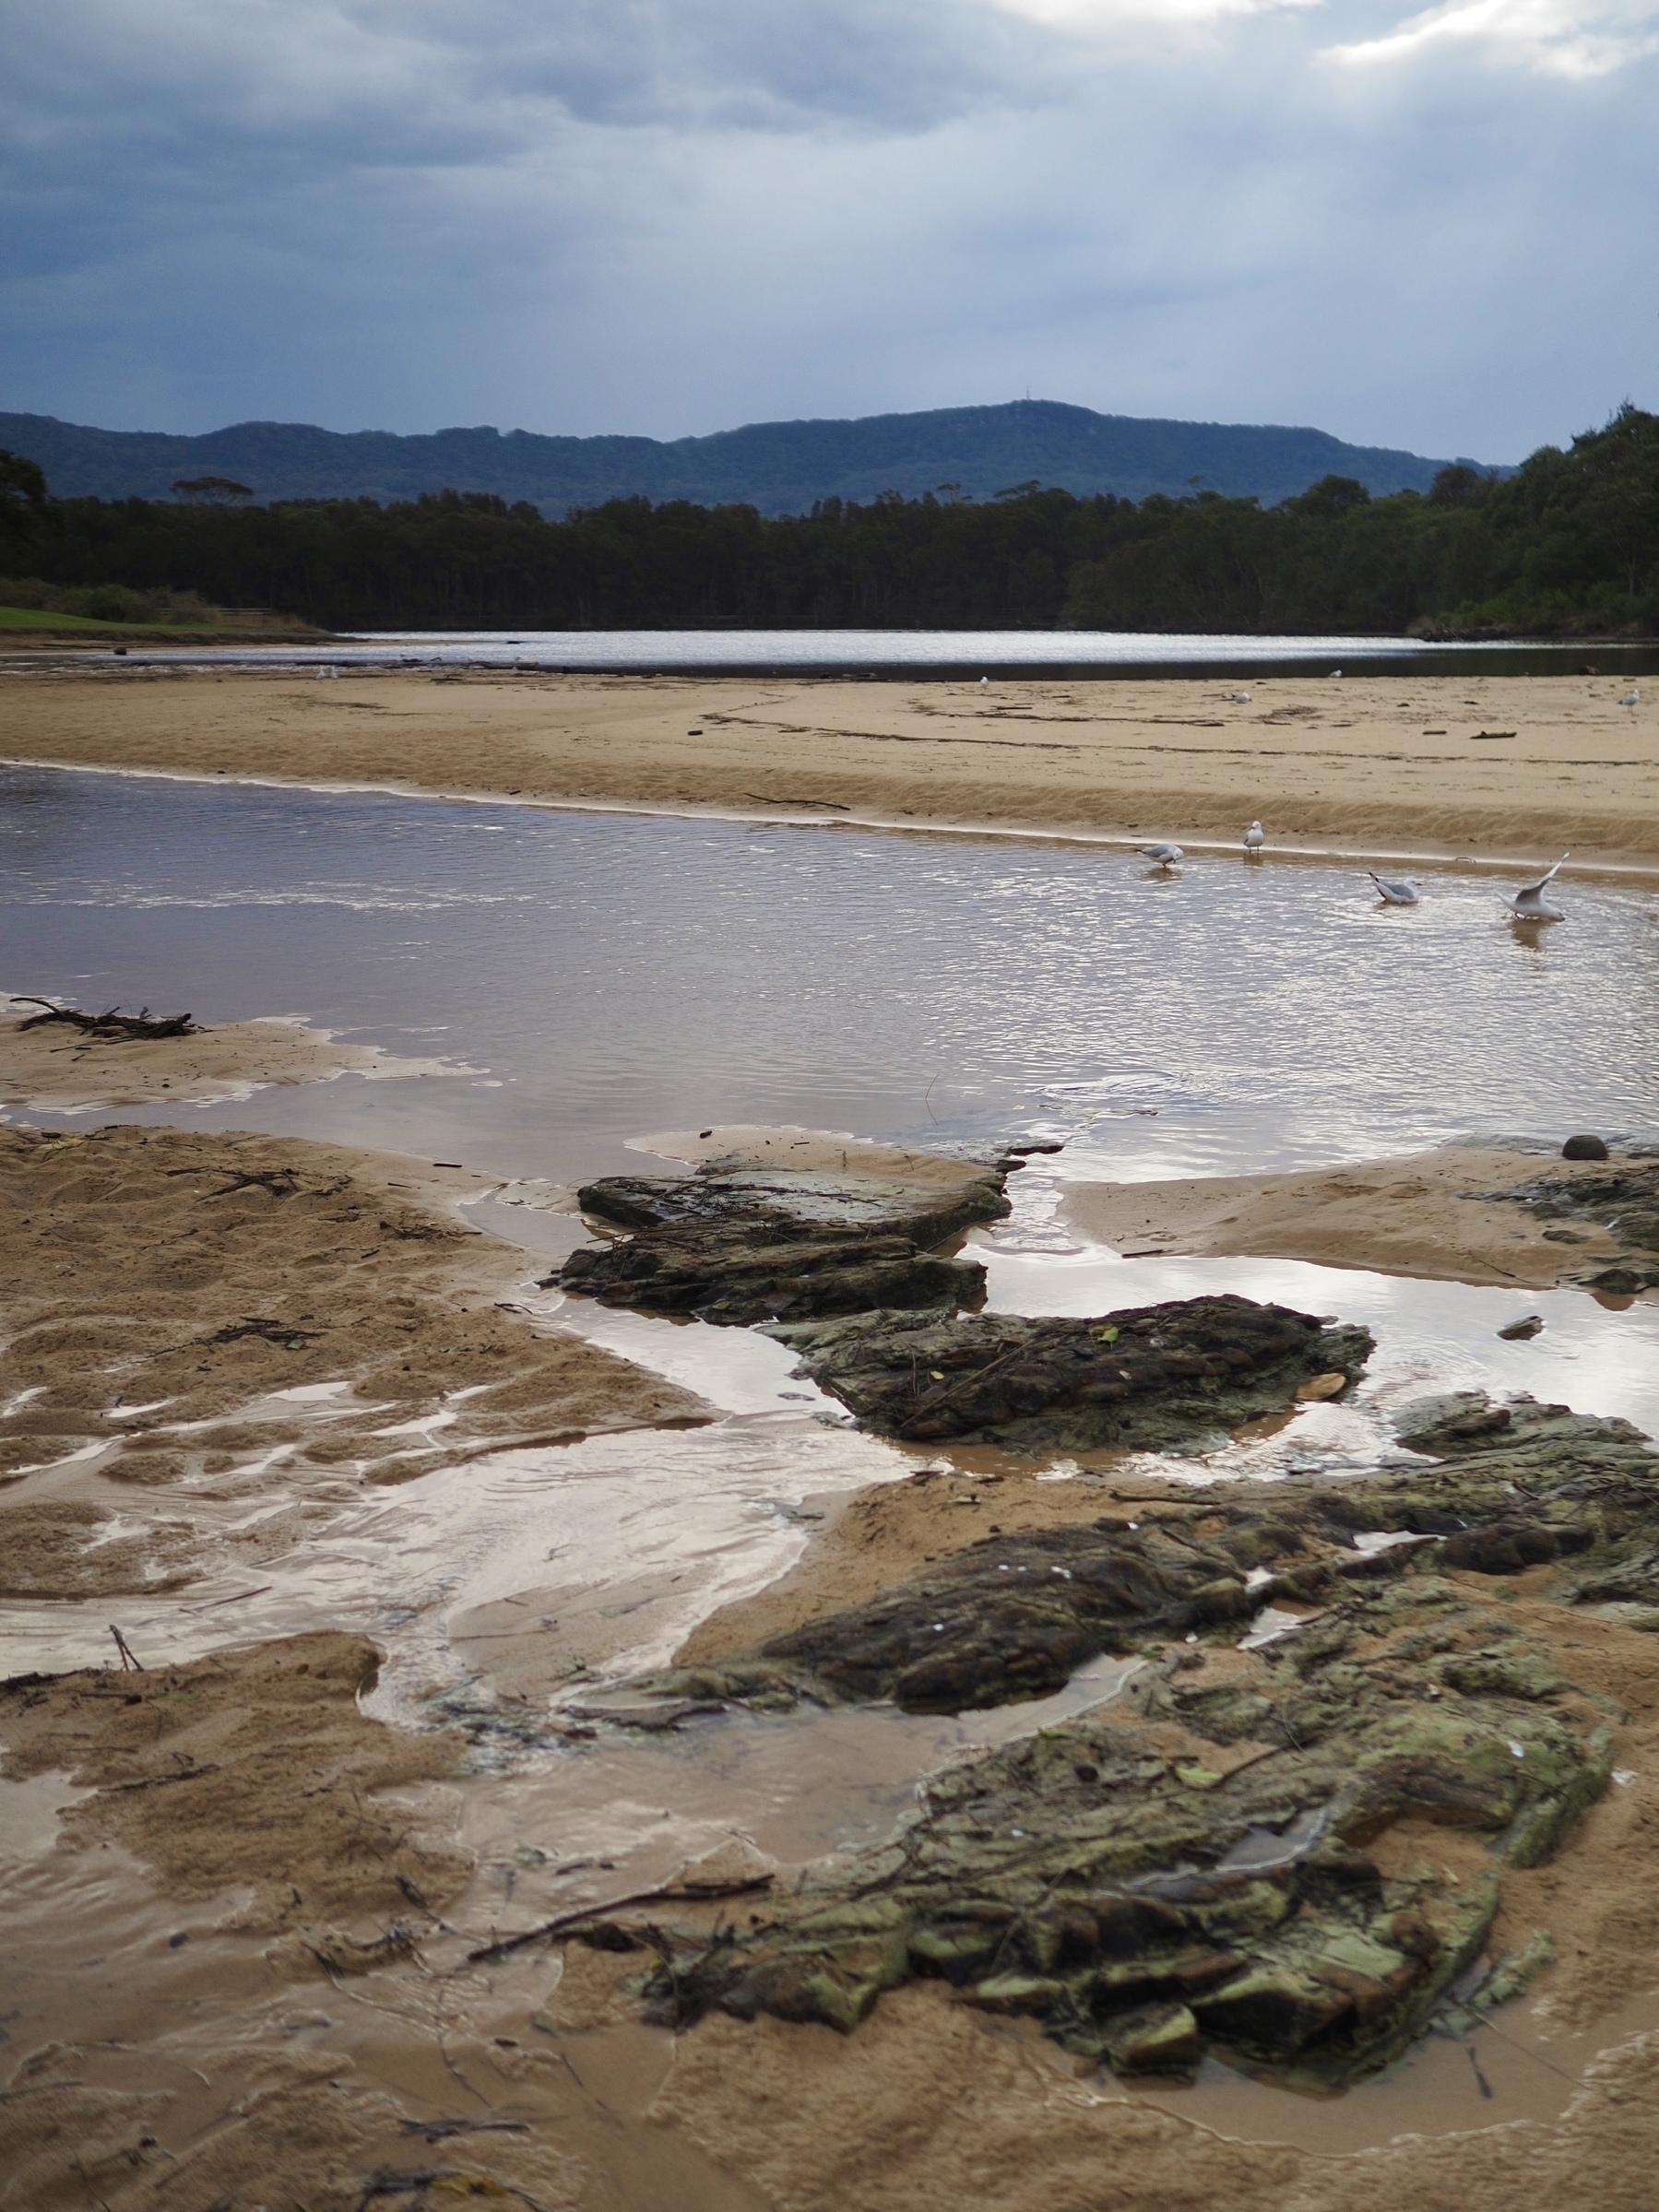 A winding sandy creek with rocks in the foreground, seagulls in the water and bushy mountains in the distance